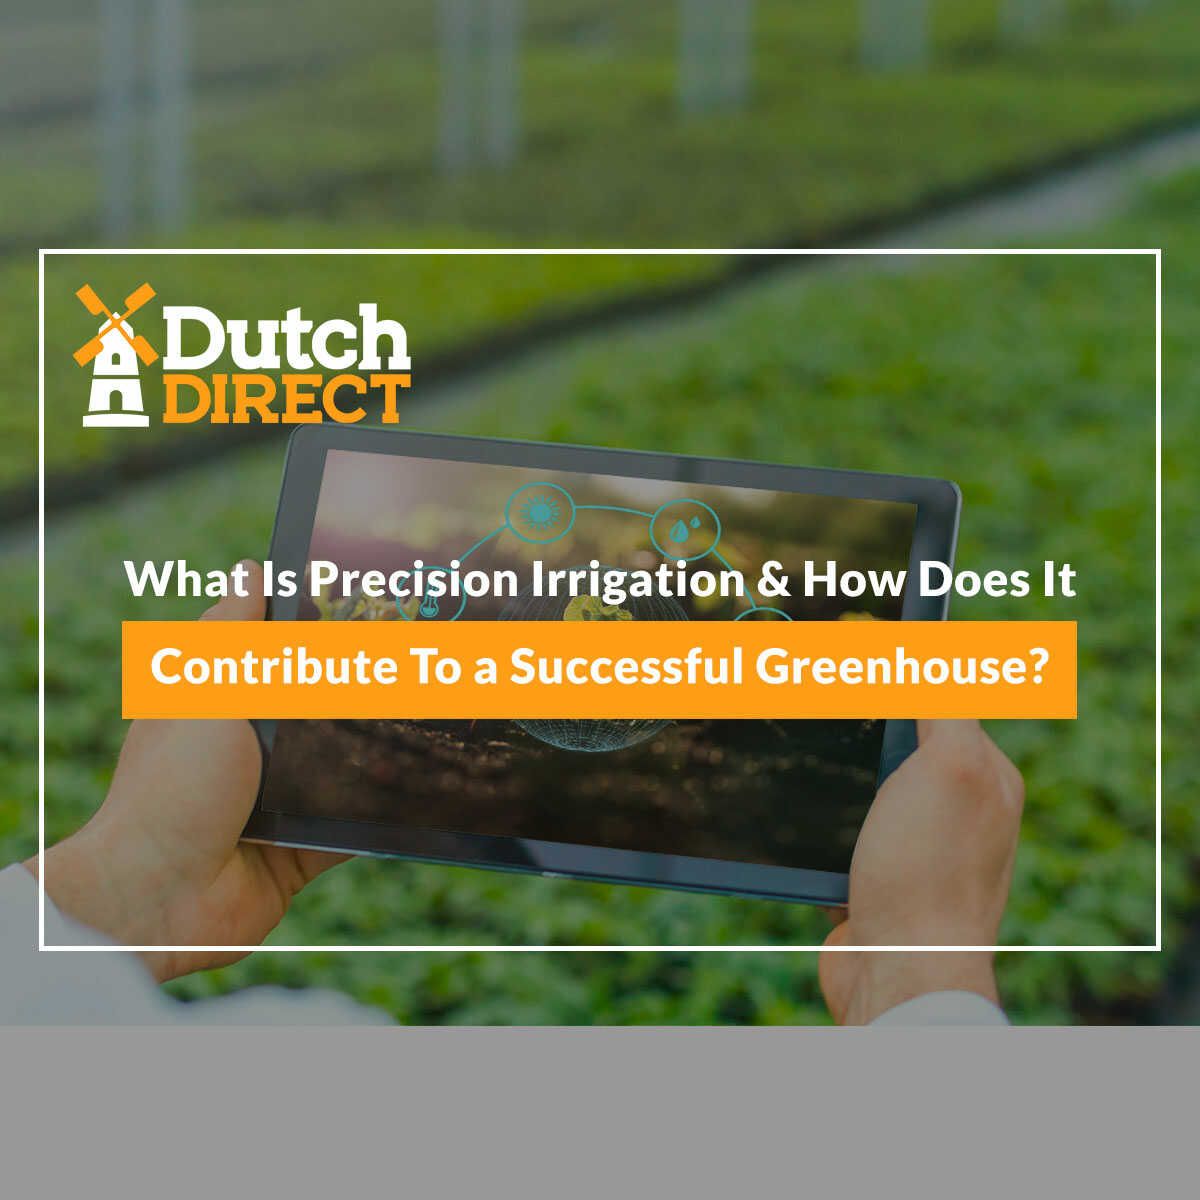 What Is Precision Irrigation & How Does It Contribute To a Successful Greenhouse In Arizona